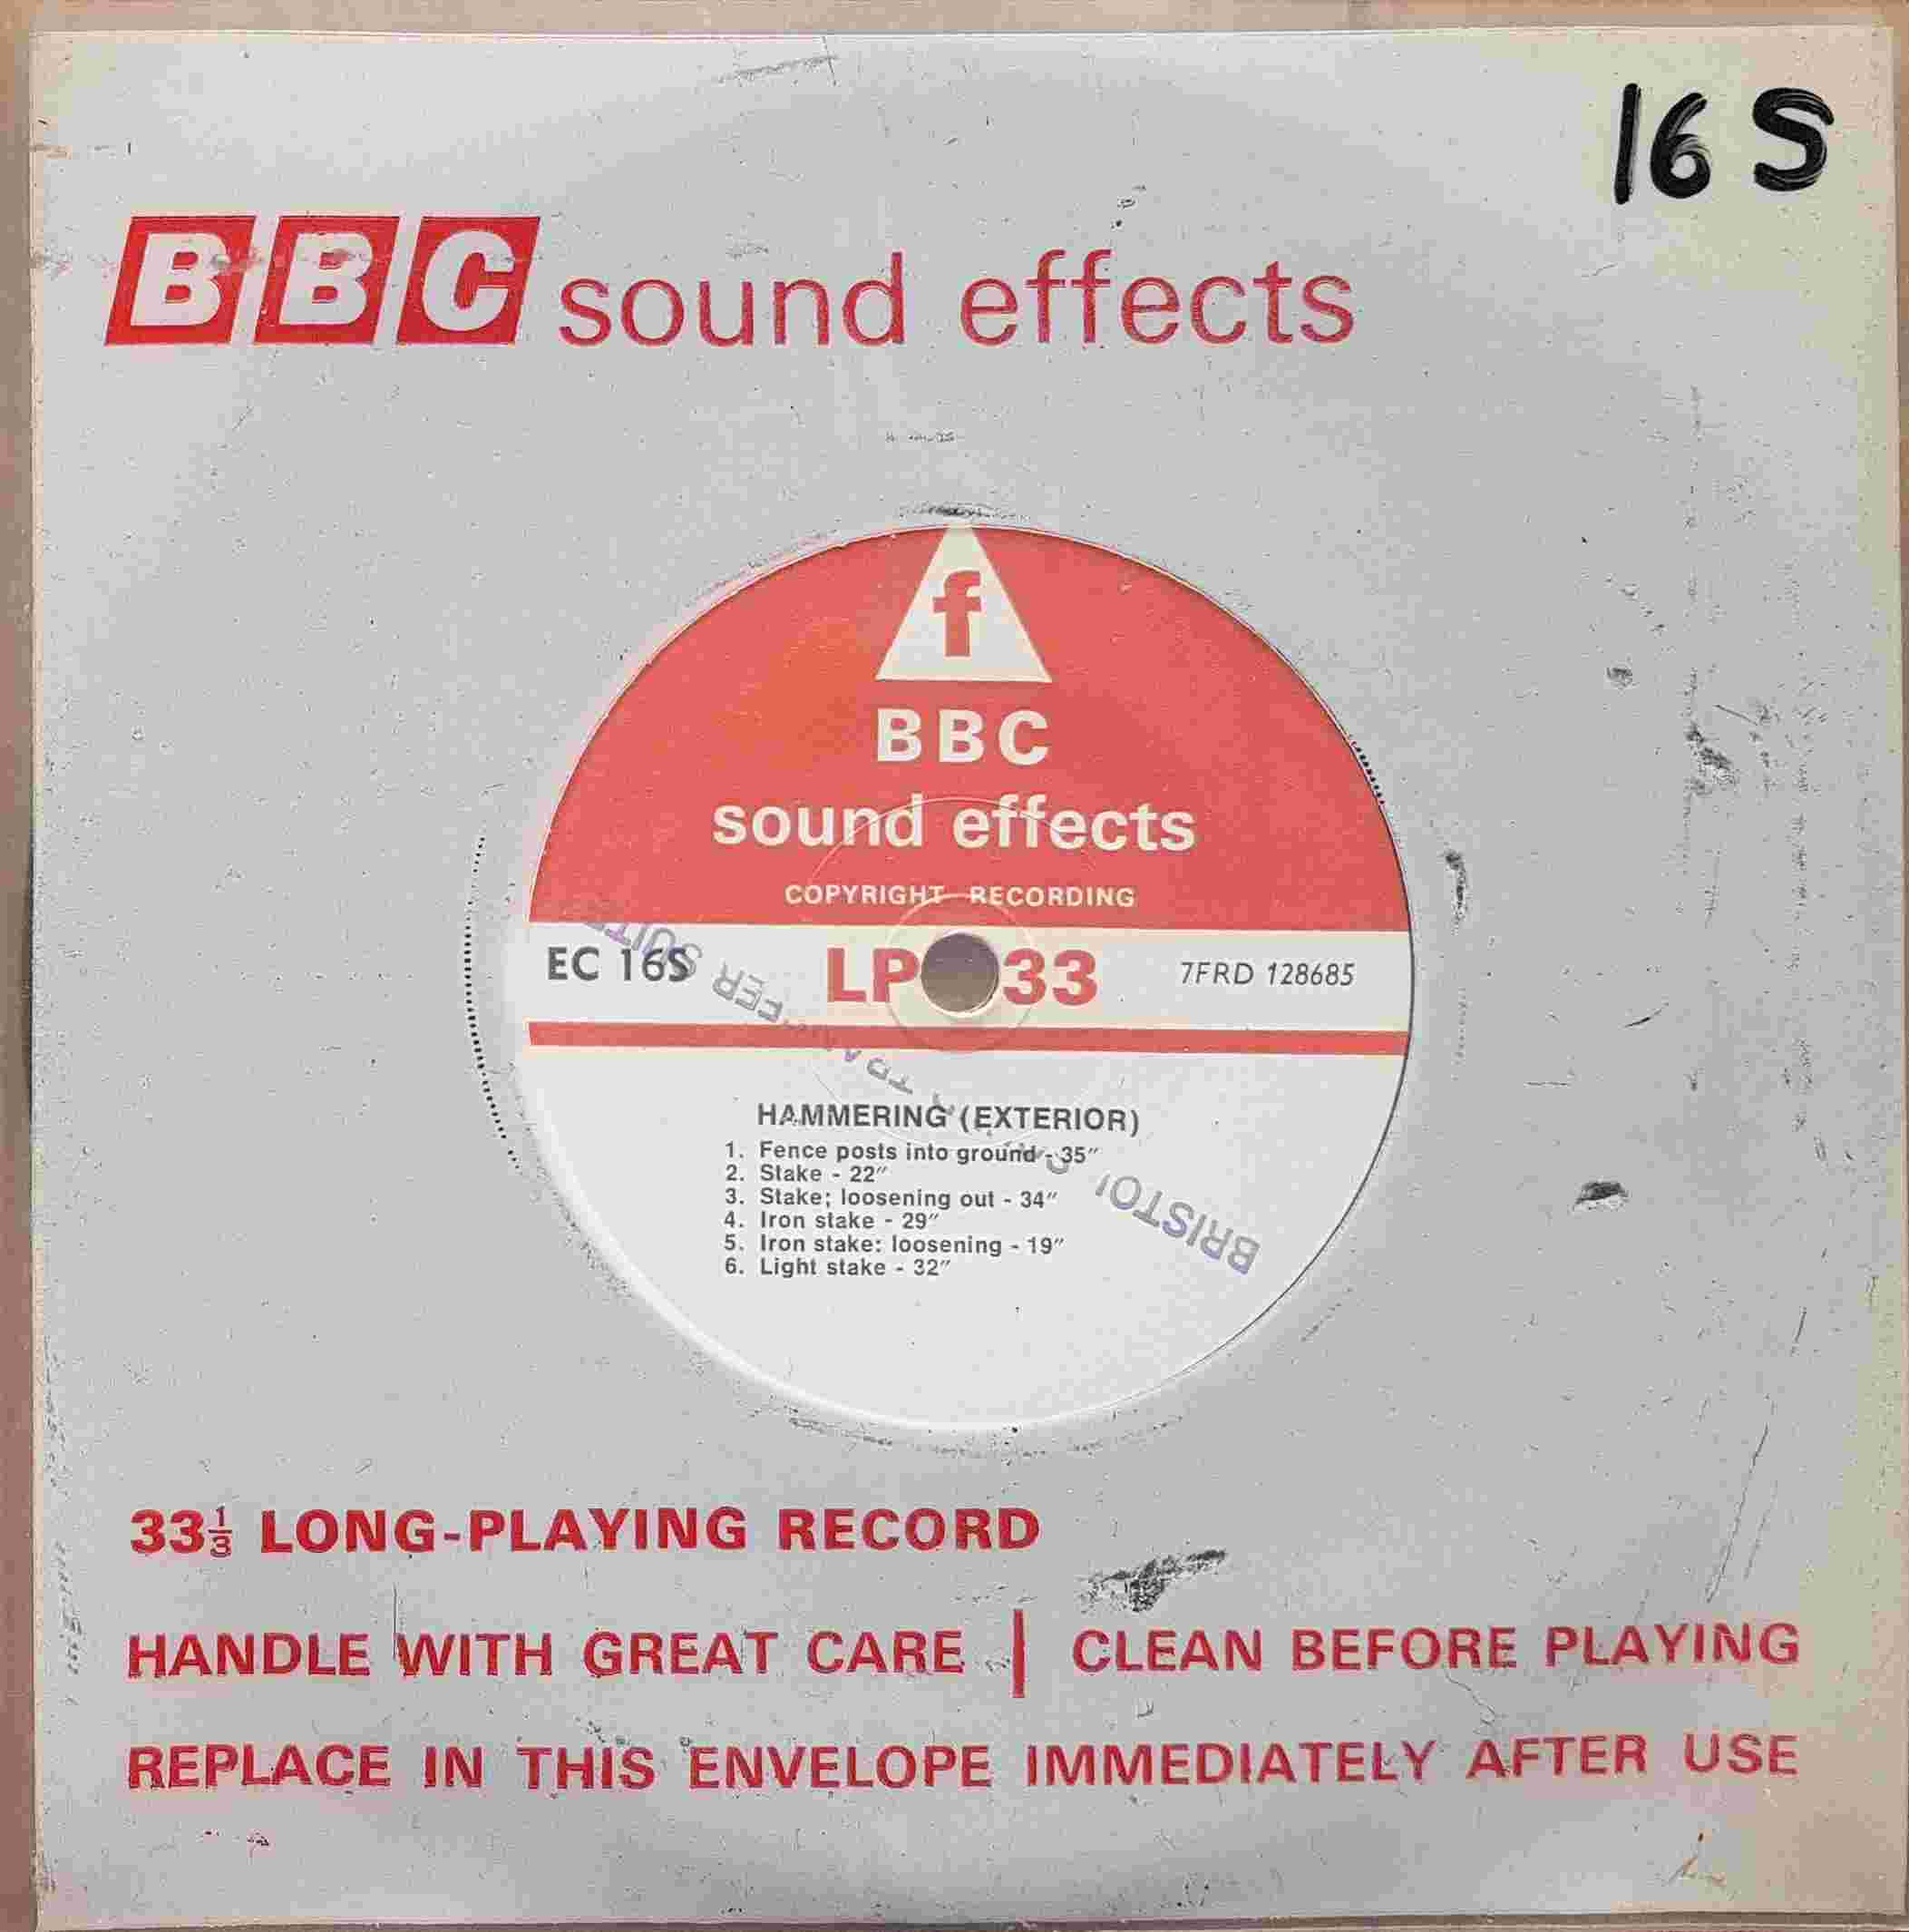 Picture of EC 16S Hammering (Exterior) by artist Not registered from the BBC singles - Records and Tapes library